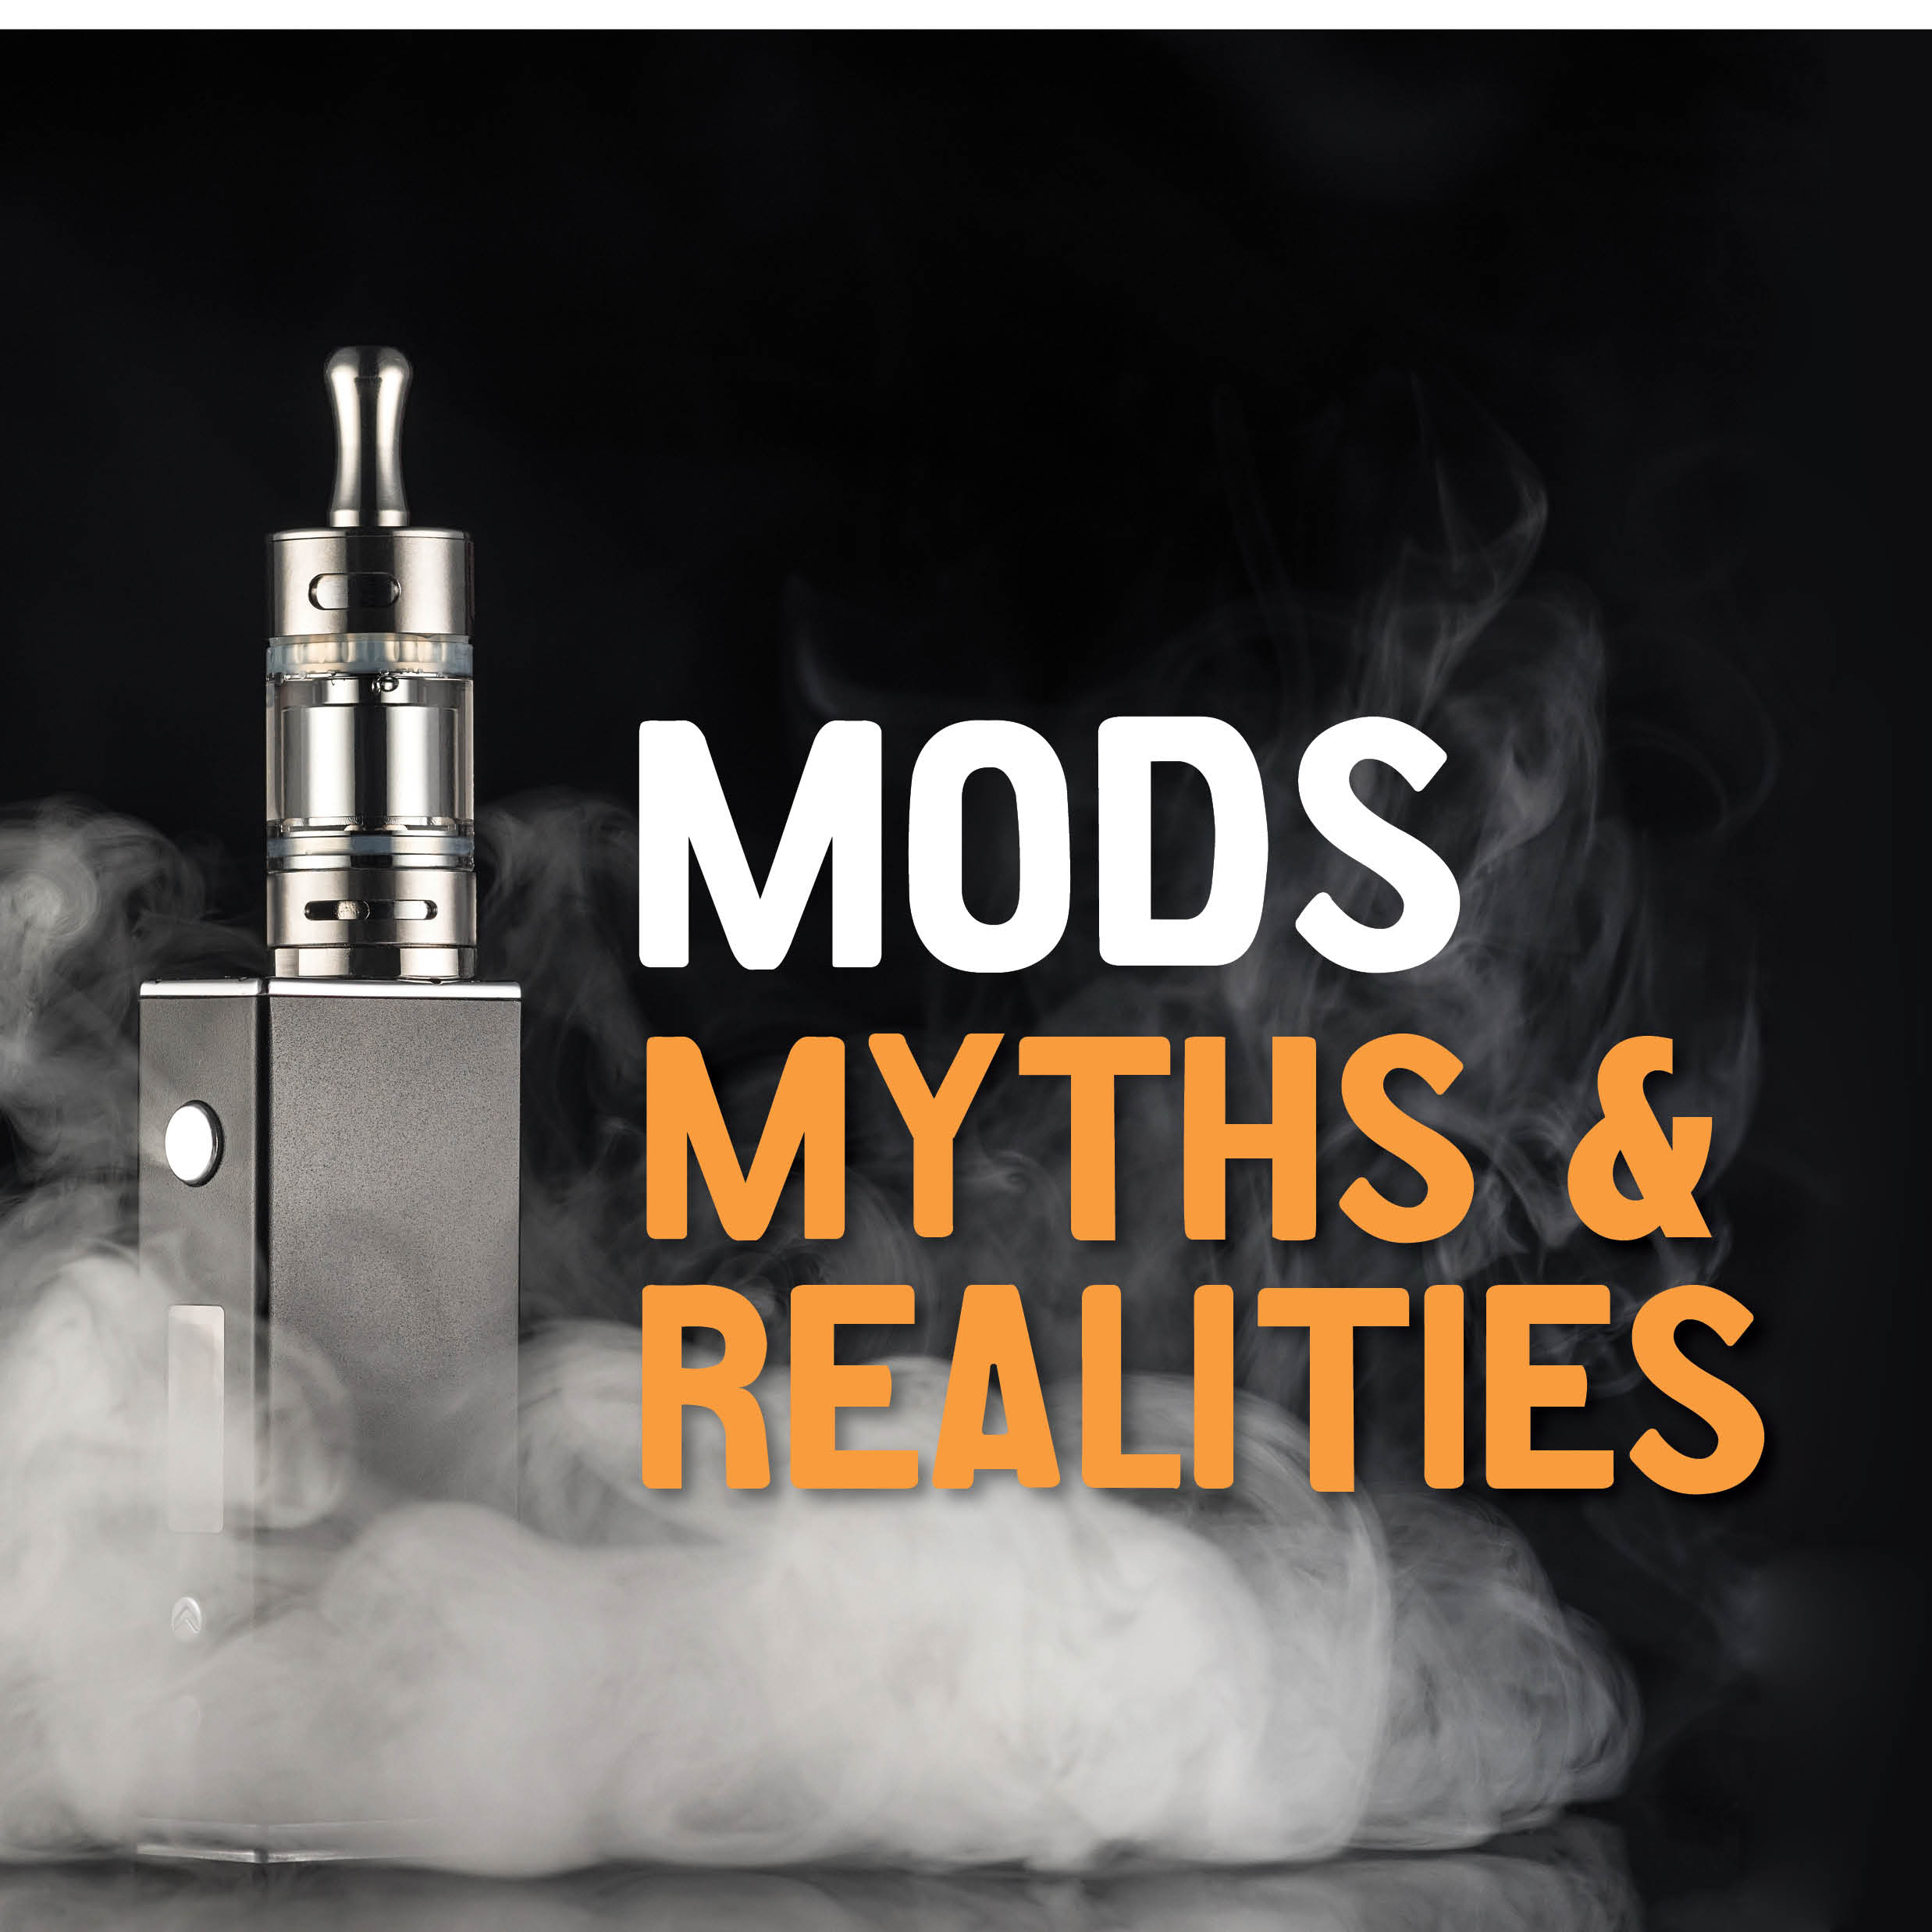 MODs - Myths and Realities*